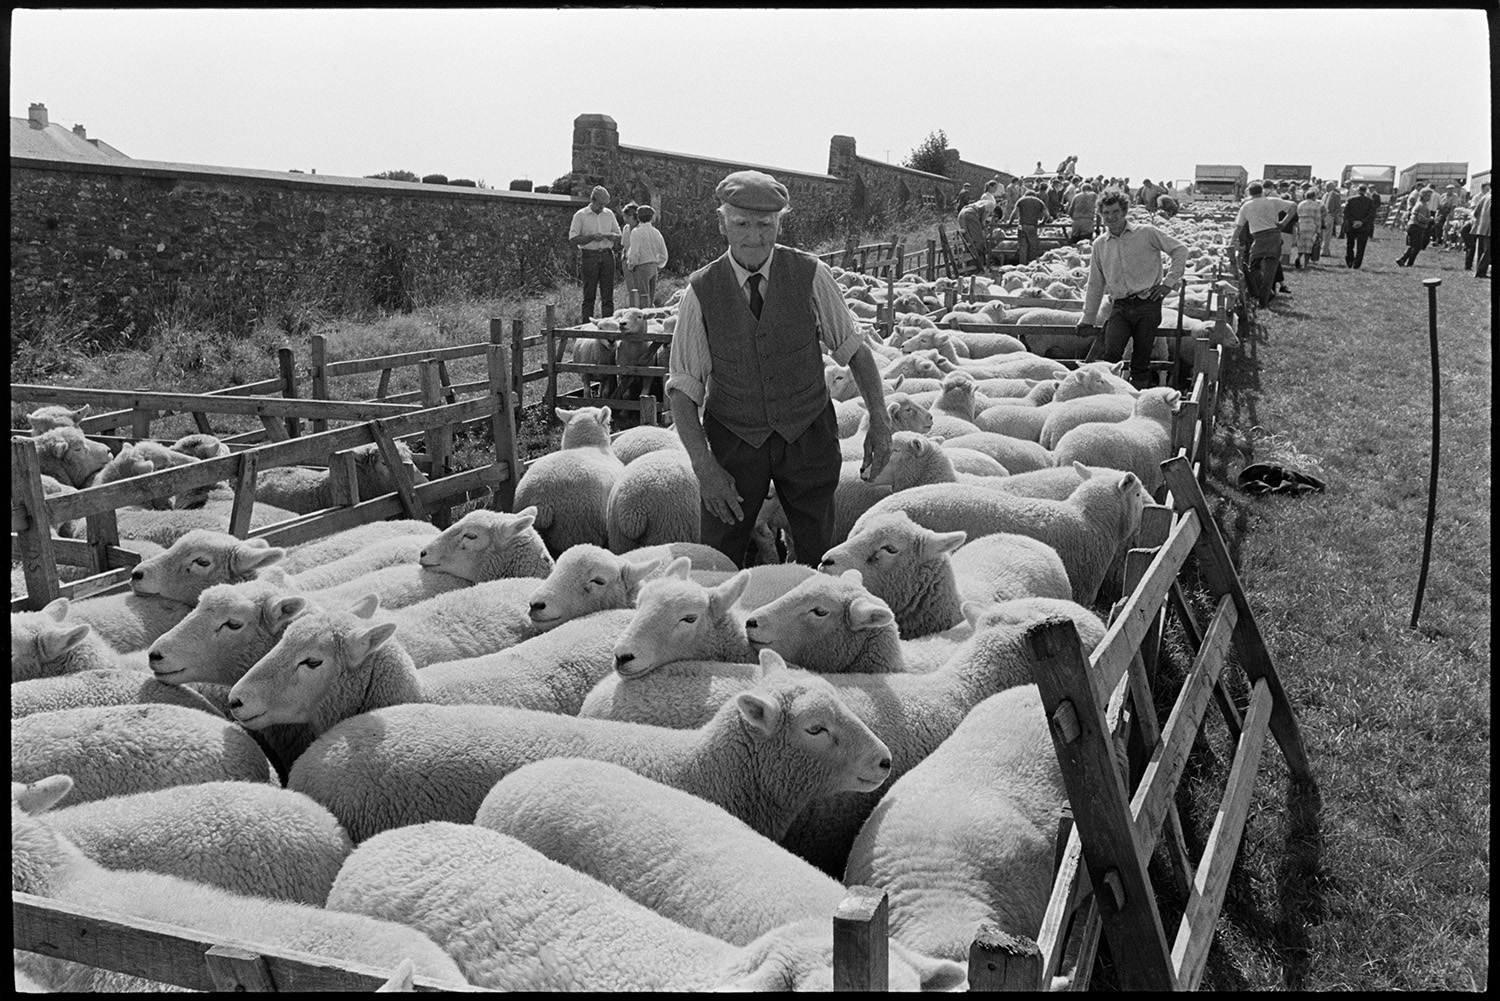 Sheep fair, farmers, auctioneers moving along pens of sheep on hot day. 
[A man in a pen of sheep at South Molton Sheep Fair. Other people are looking at sheep in the background. The pens are lined up in a field near a stone wall. Lorries can be seen in the background.]